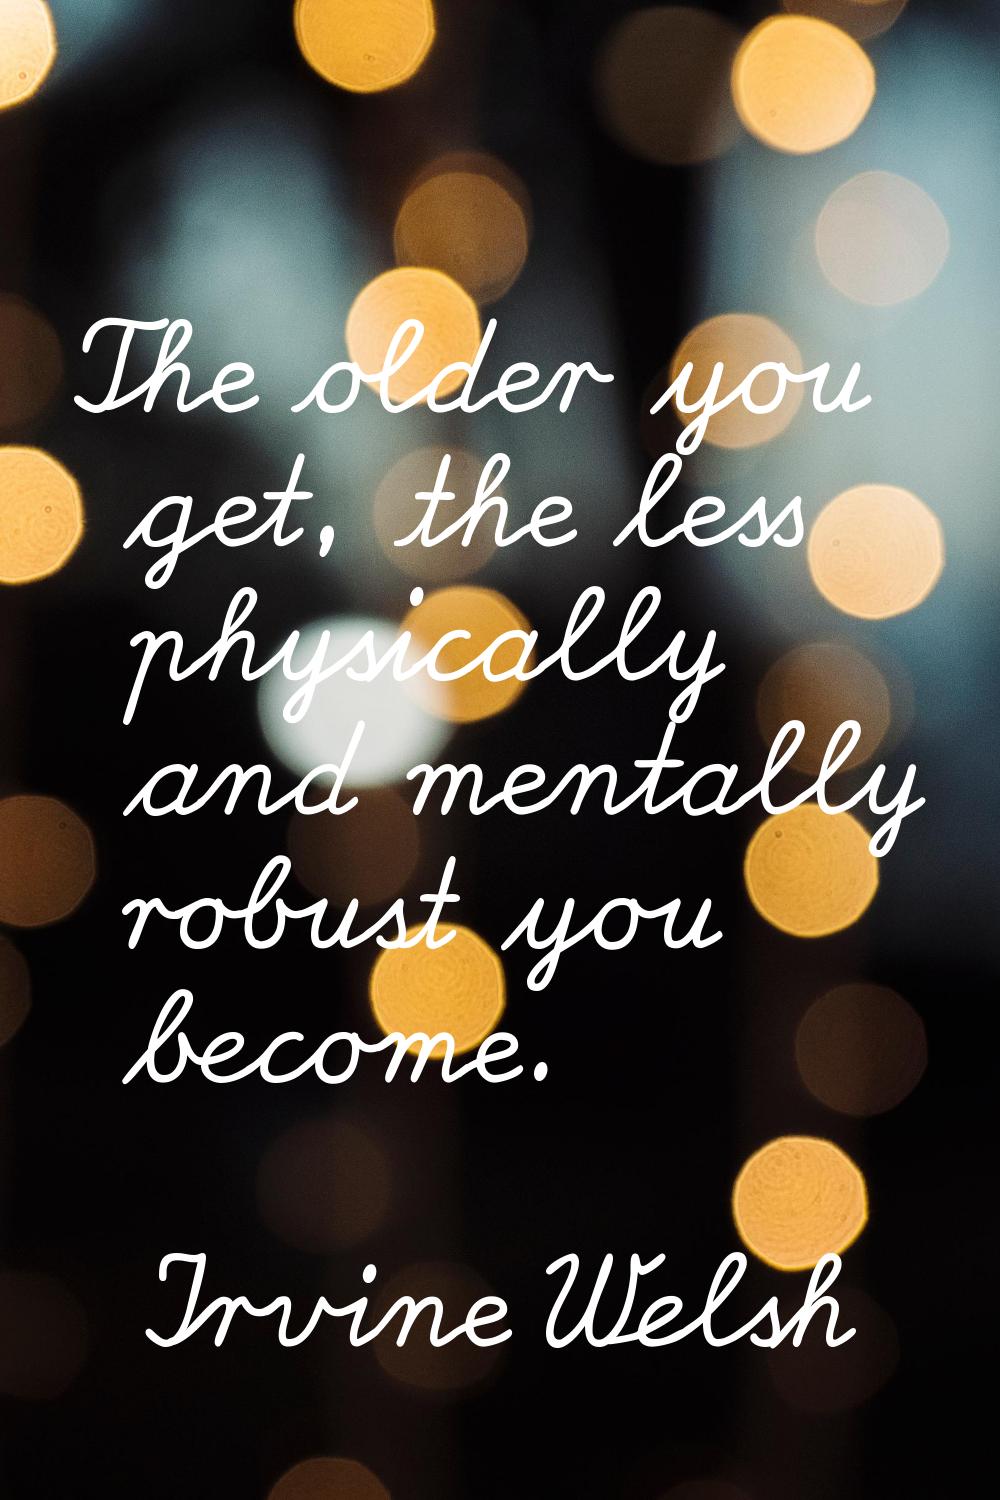 The older you get, the less physically and mentally robust you become.